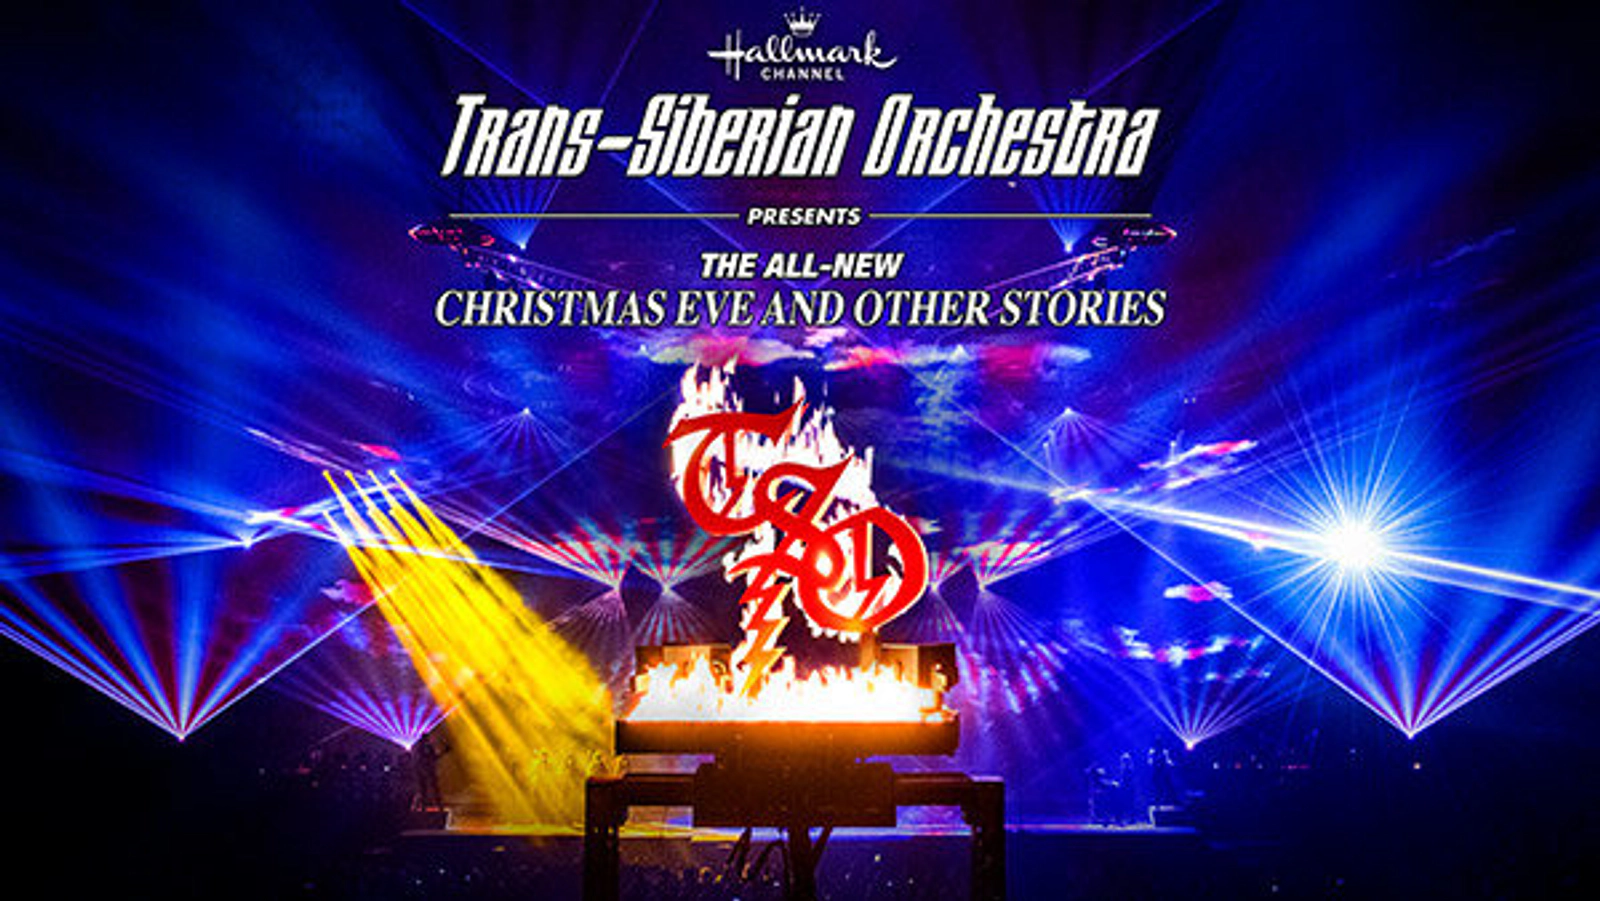 Trans-Siberian Orchestra presented by Hallmark Channel 2019 - Thumbnail Image